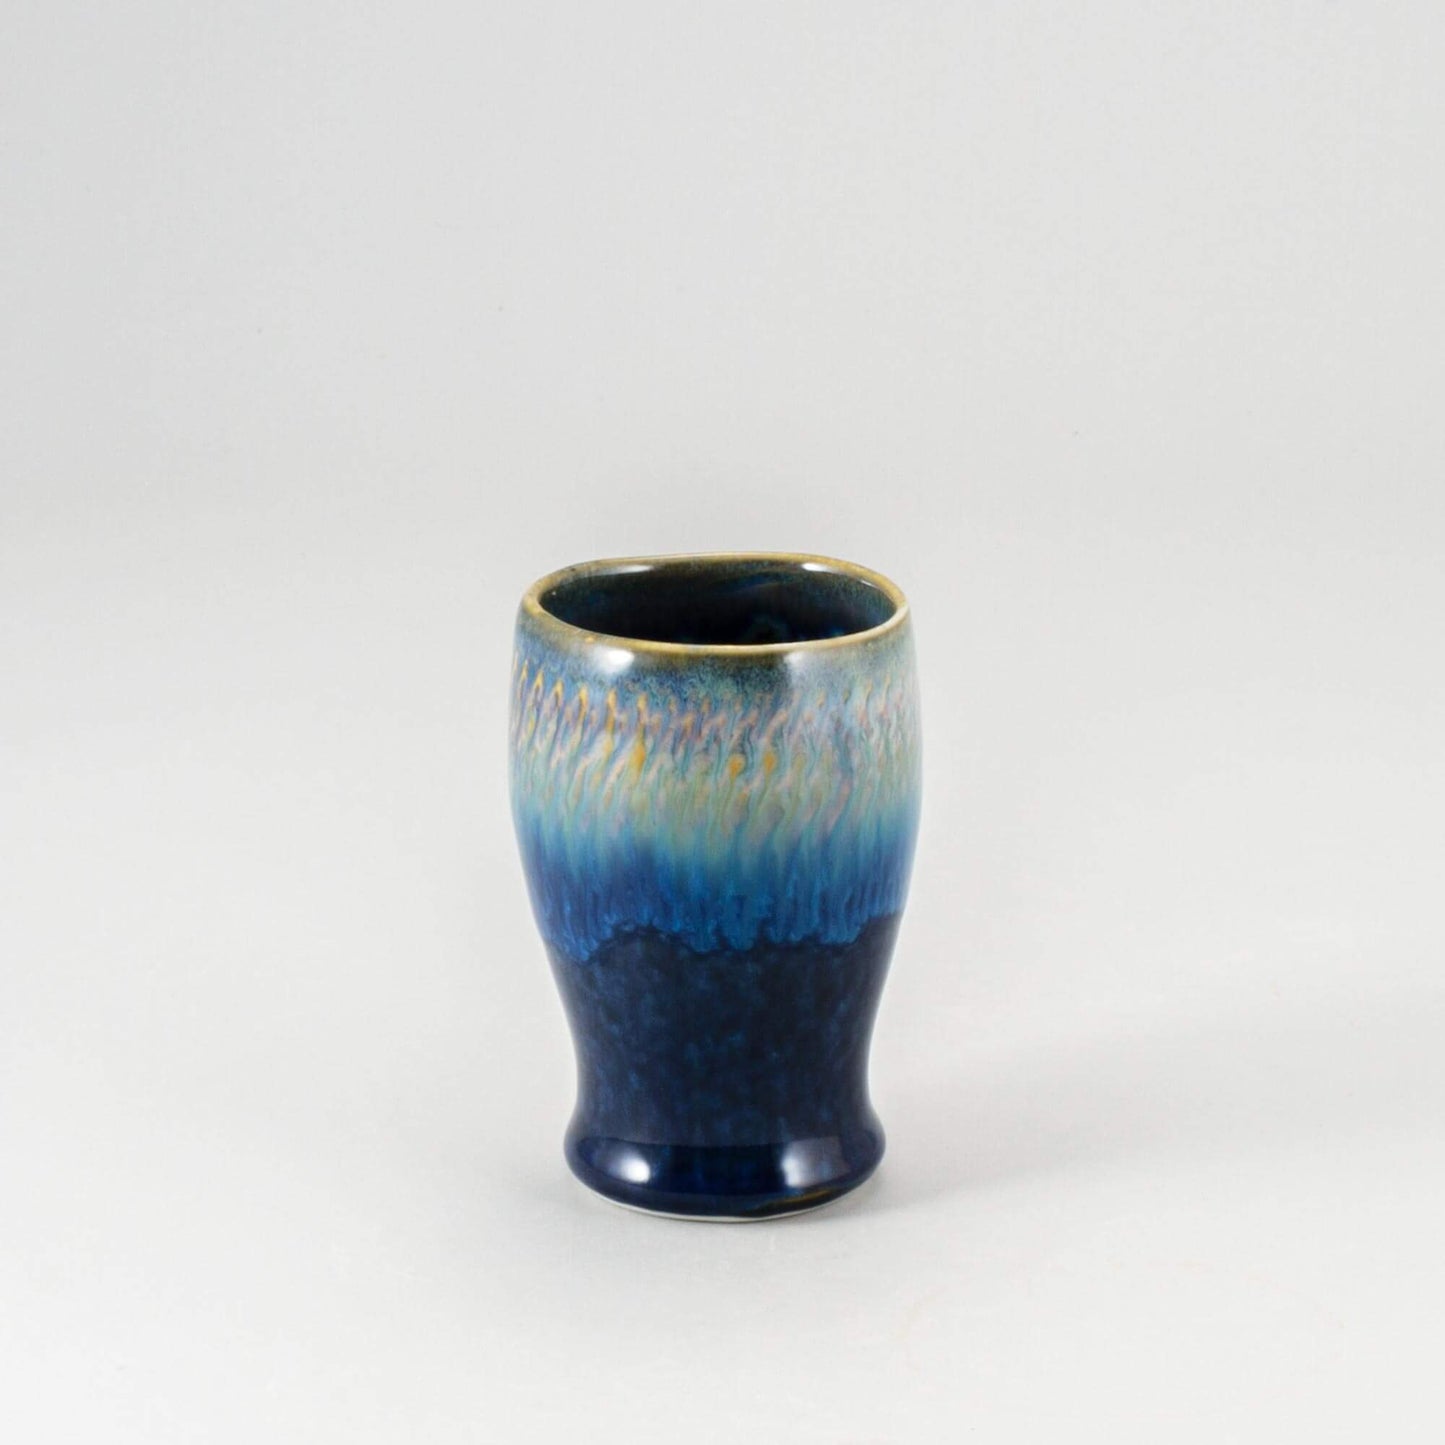 Handmade Pottery Curvy Tumbler in Cobalt pattern made by Georgetown Pottery in Maine